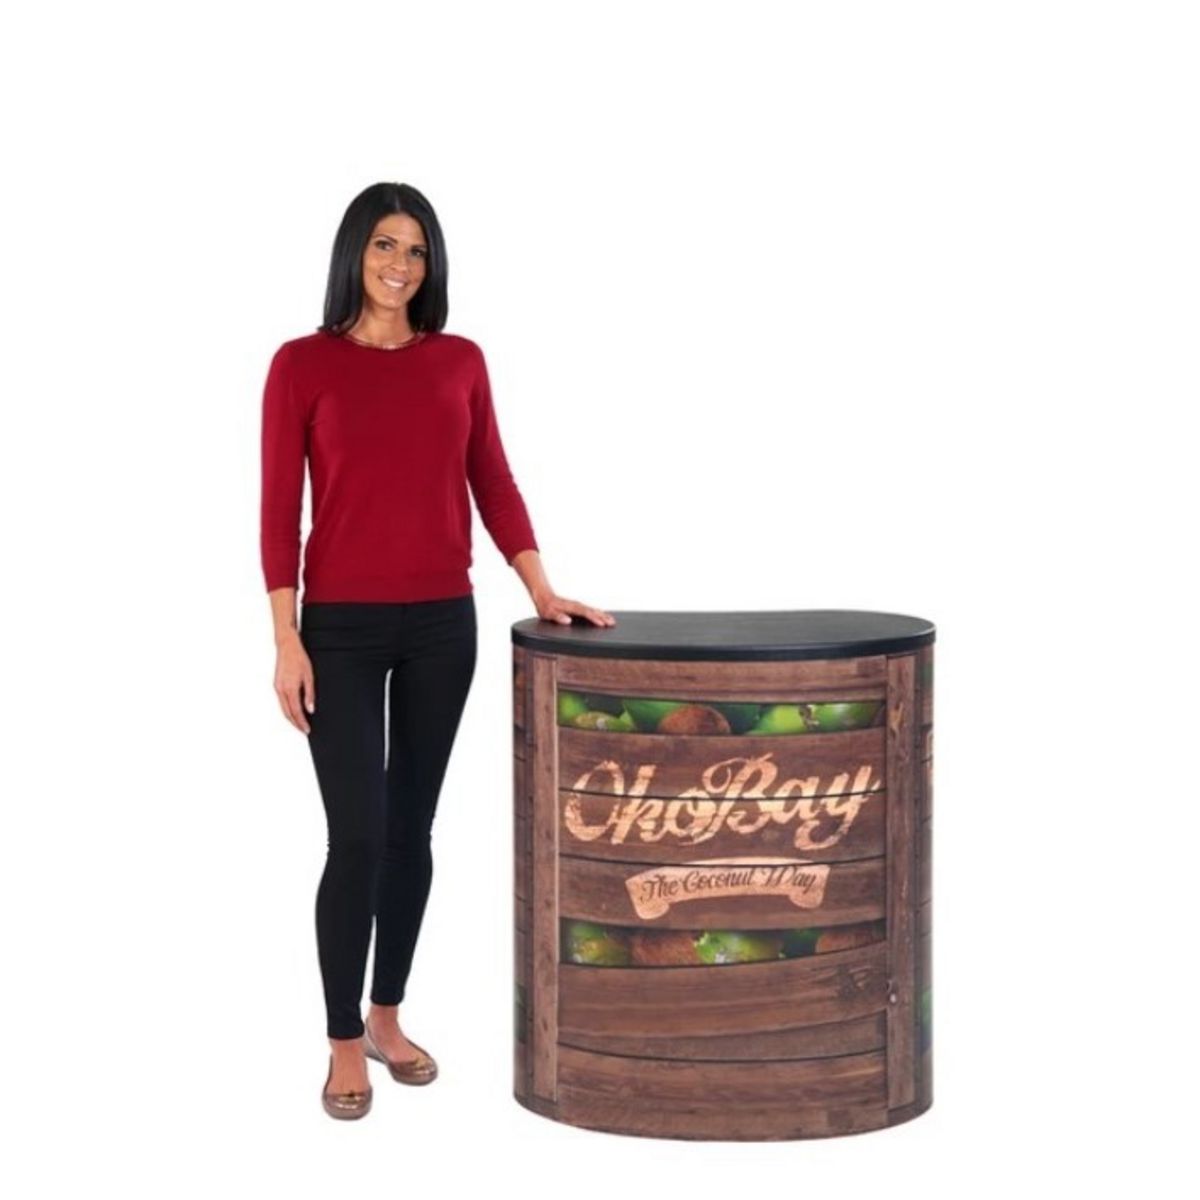 Lady standing next to a compelted Finesse2 promotional display counter with the black leatherette counter top.jpg